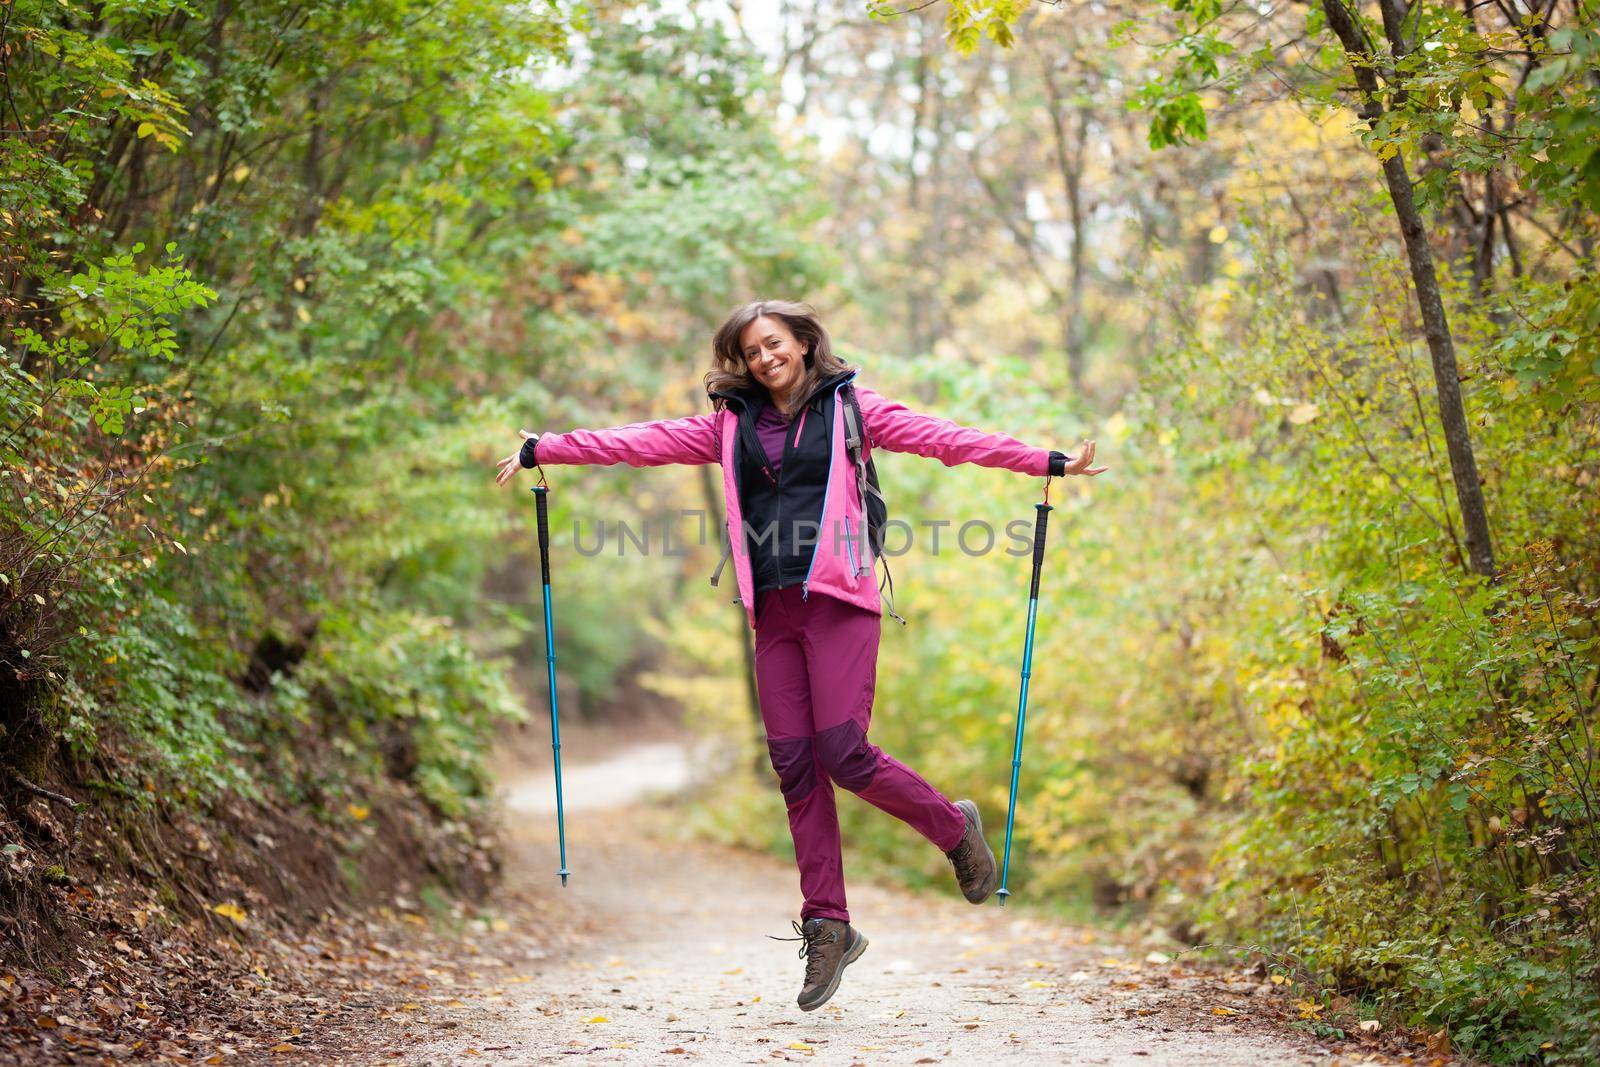 Hiker girl jumping on a trail in the mountains. Backpacker with hiking poles and pink jacket in a forest. Happy lifestyle outdoors. by kokimk